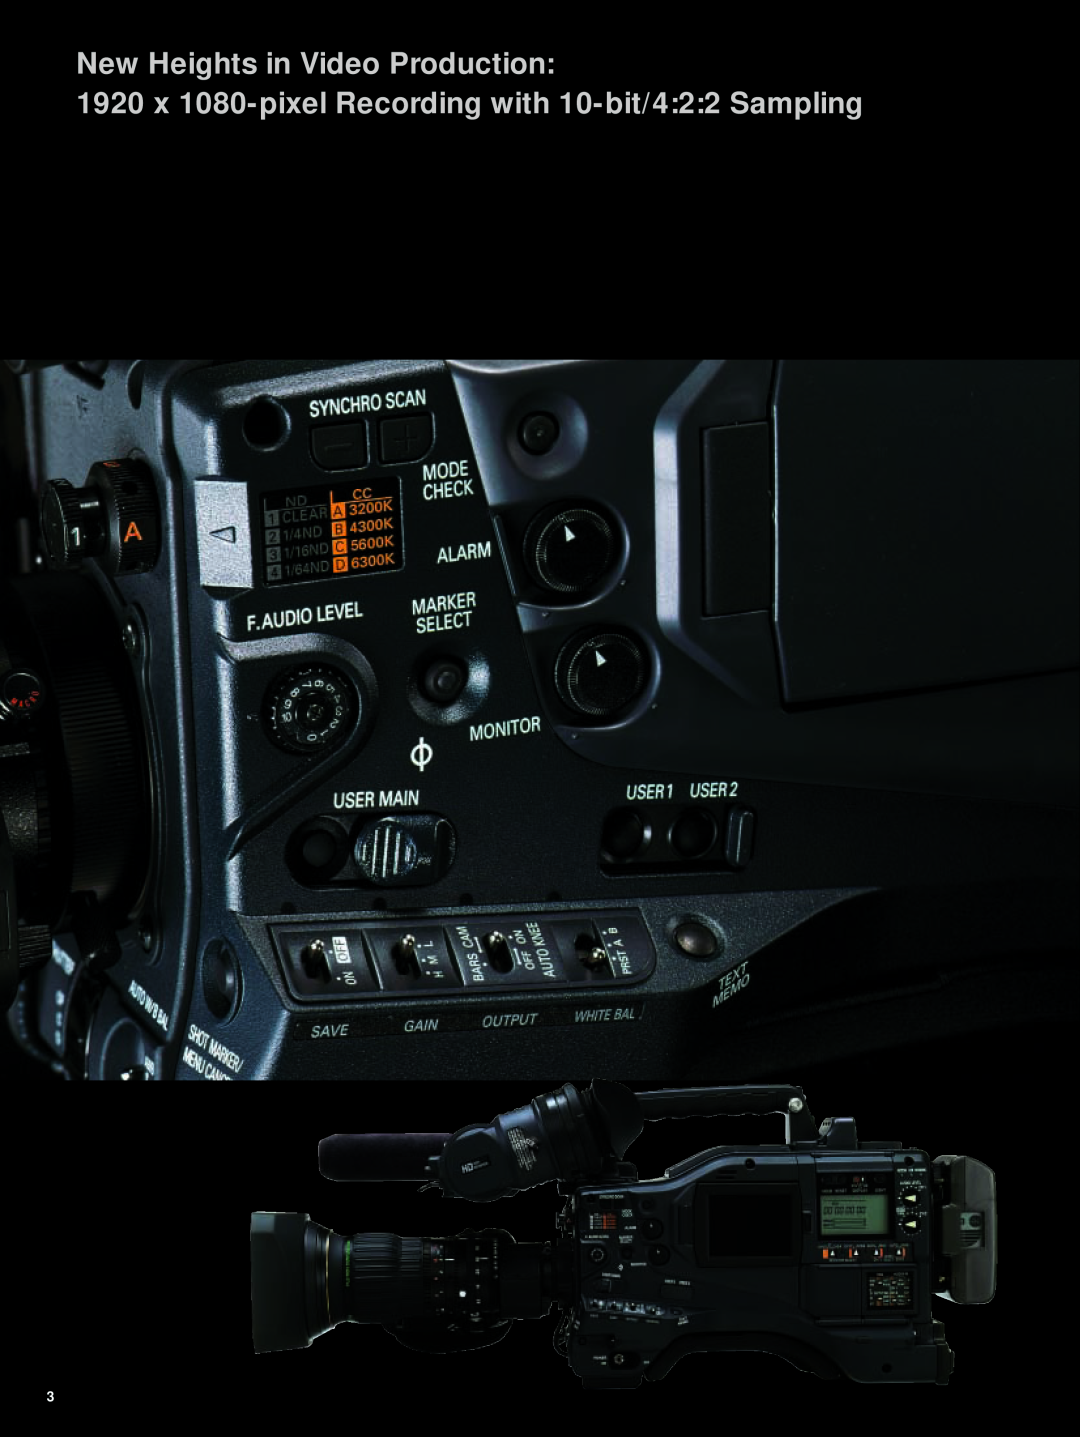 Panasonic AJ-HPX3000 manual New Heights in Video Production, 1920 x 1080-pixel Recording with 10-bit/422 Sampling 